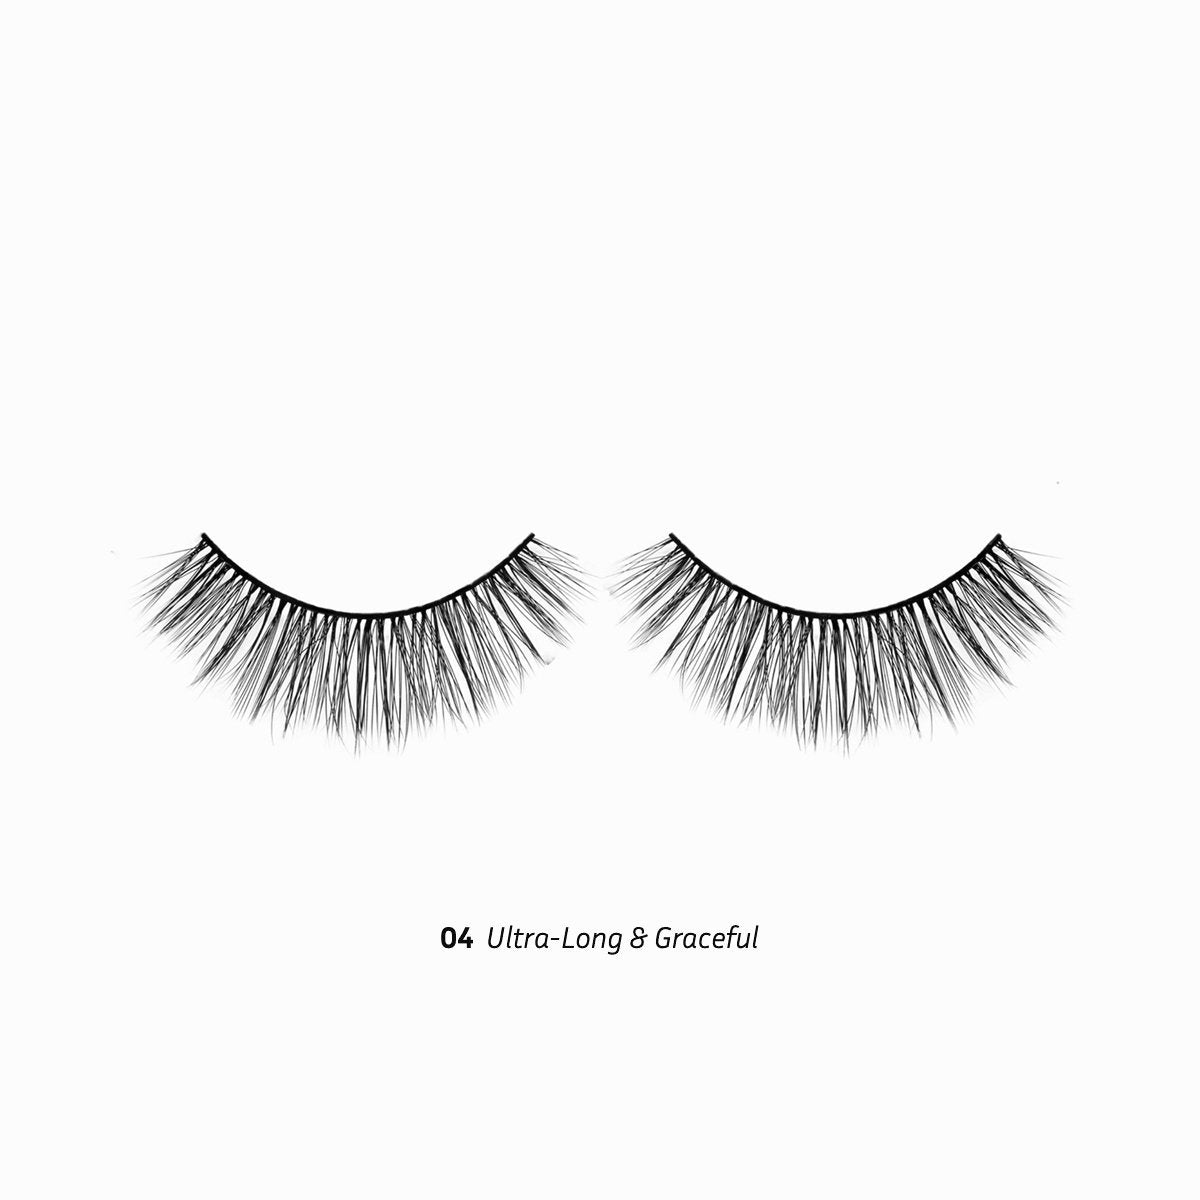 Lithe Lashes® | Classic Volume Collection | Deals | Allure Best of Beauty Winner | False Lashes | Strip Lashes | Falsies | Faux Lashes